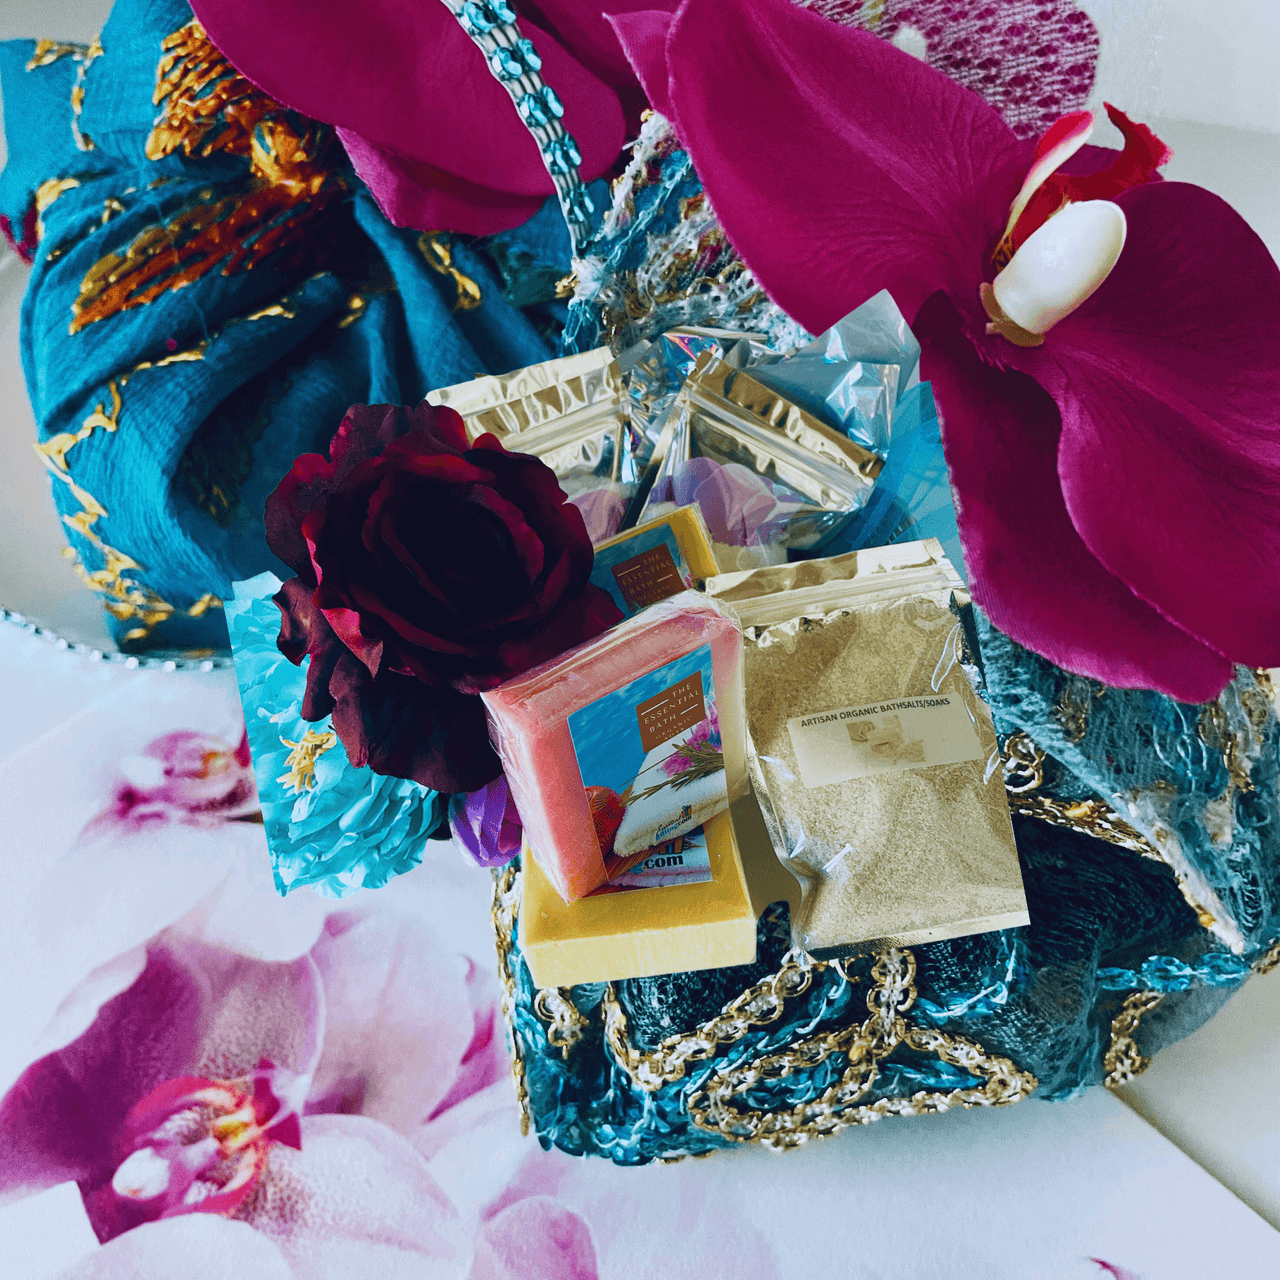 Vibrant artisan handcrafted bar soaps with floral elements, wrapped in a decorative box.